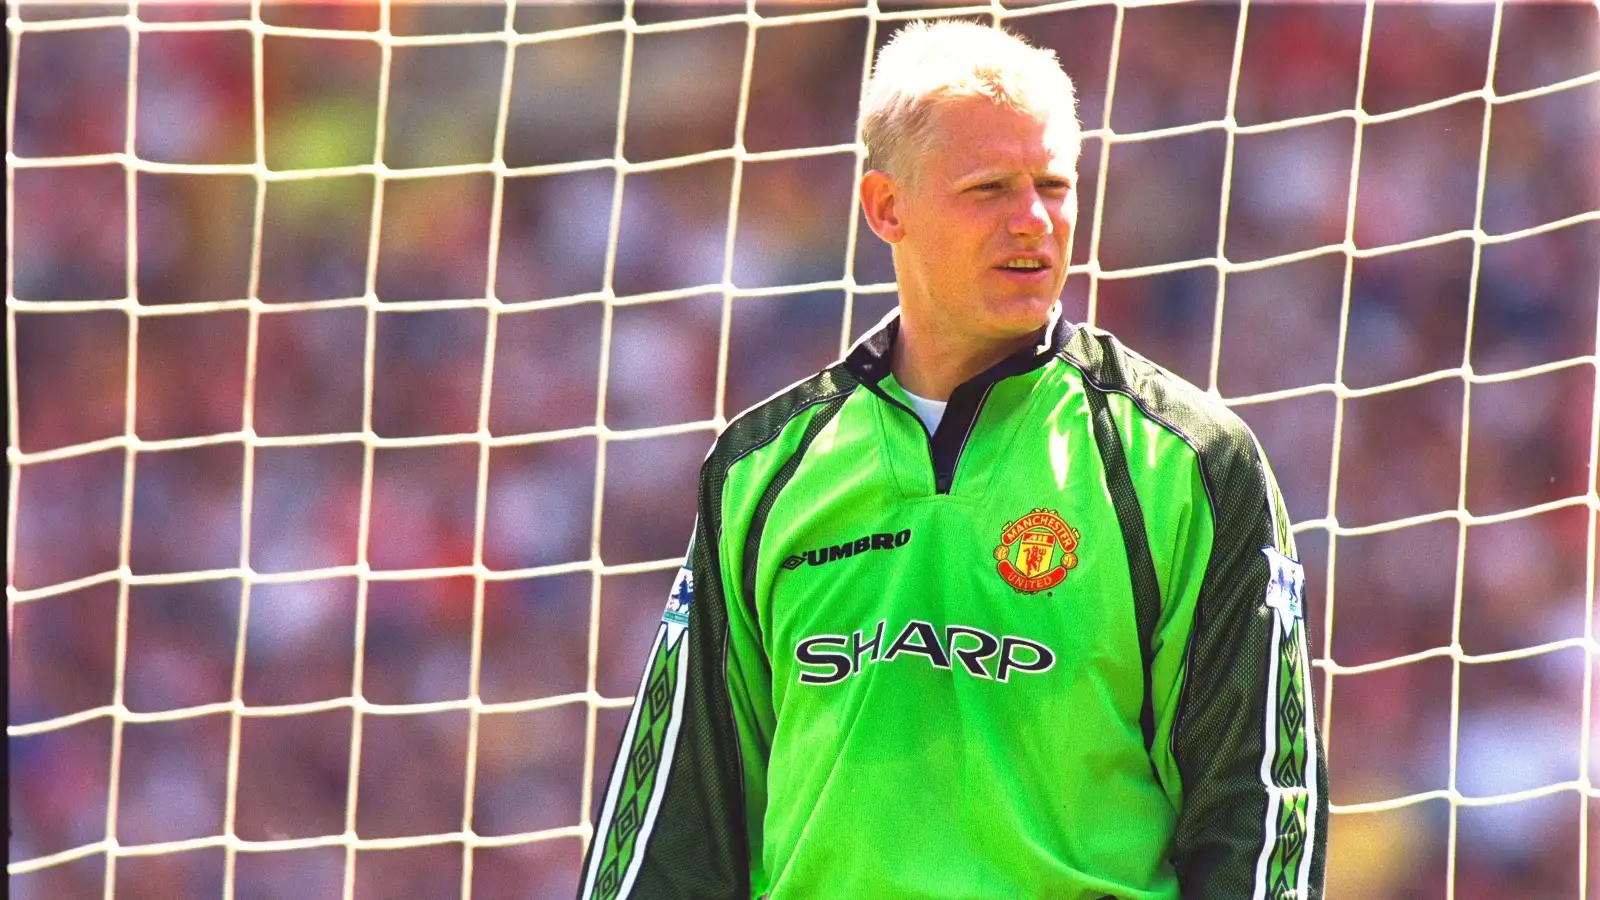 7 of Peter Schmeichel’s best and most important saves for Man Utd